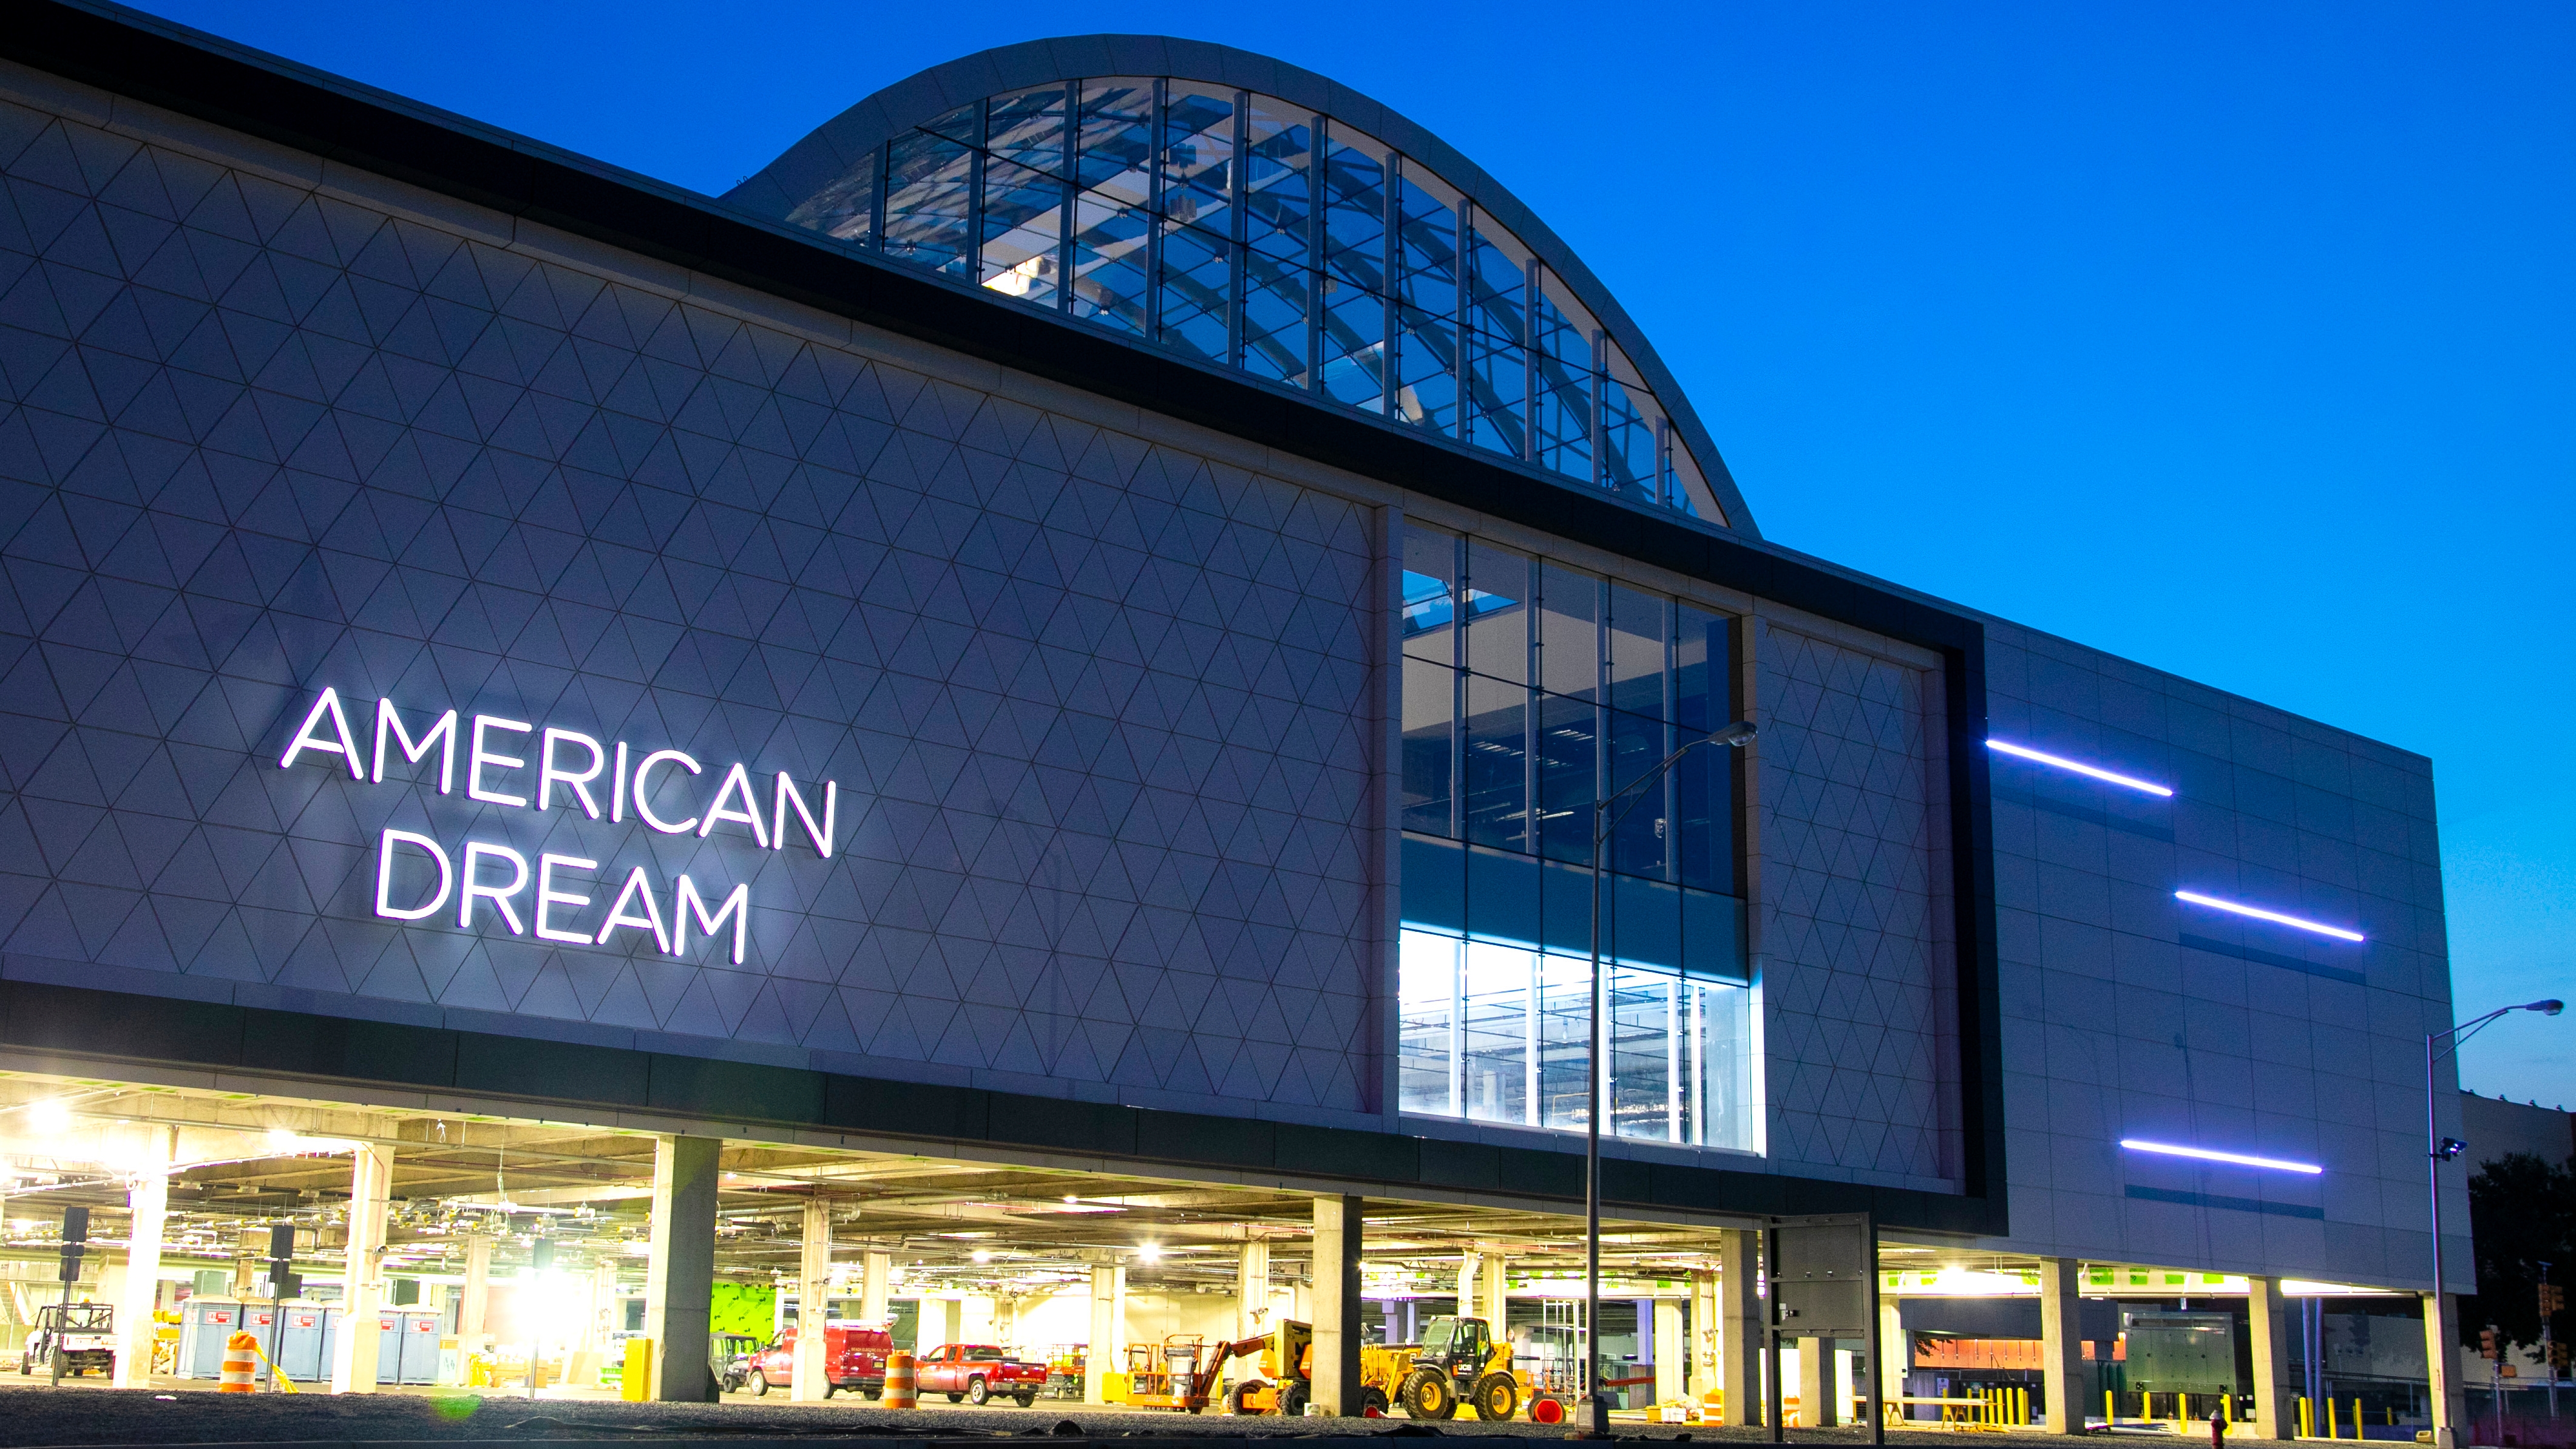 American Dream Mall Reveals It Has Landed A Retail Prize - An